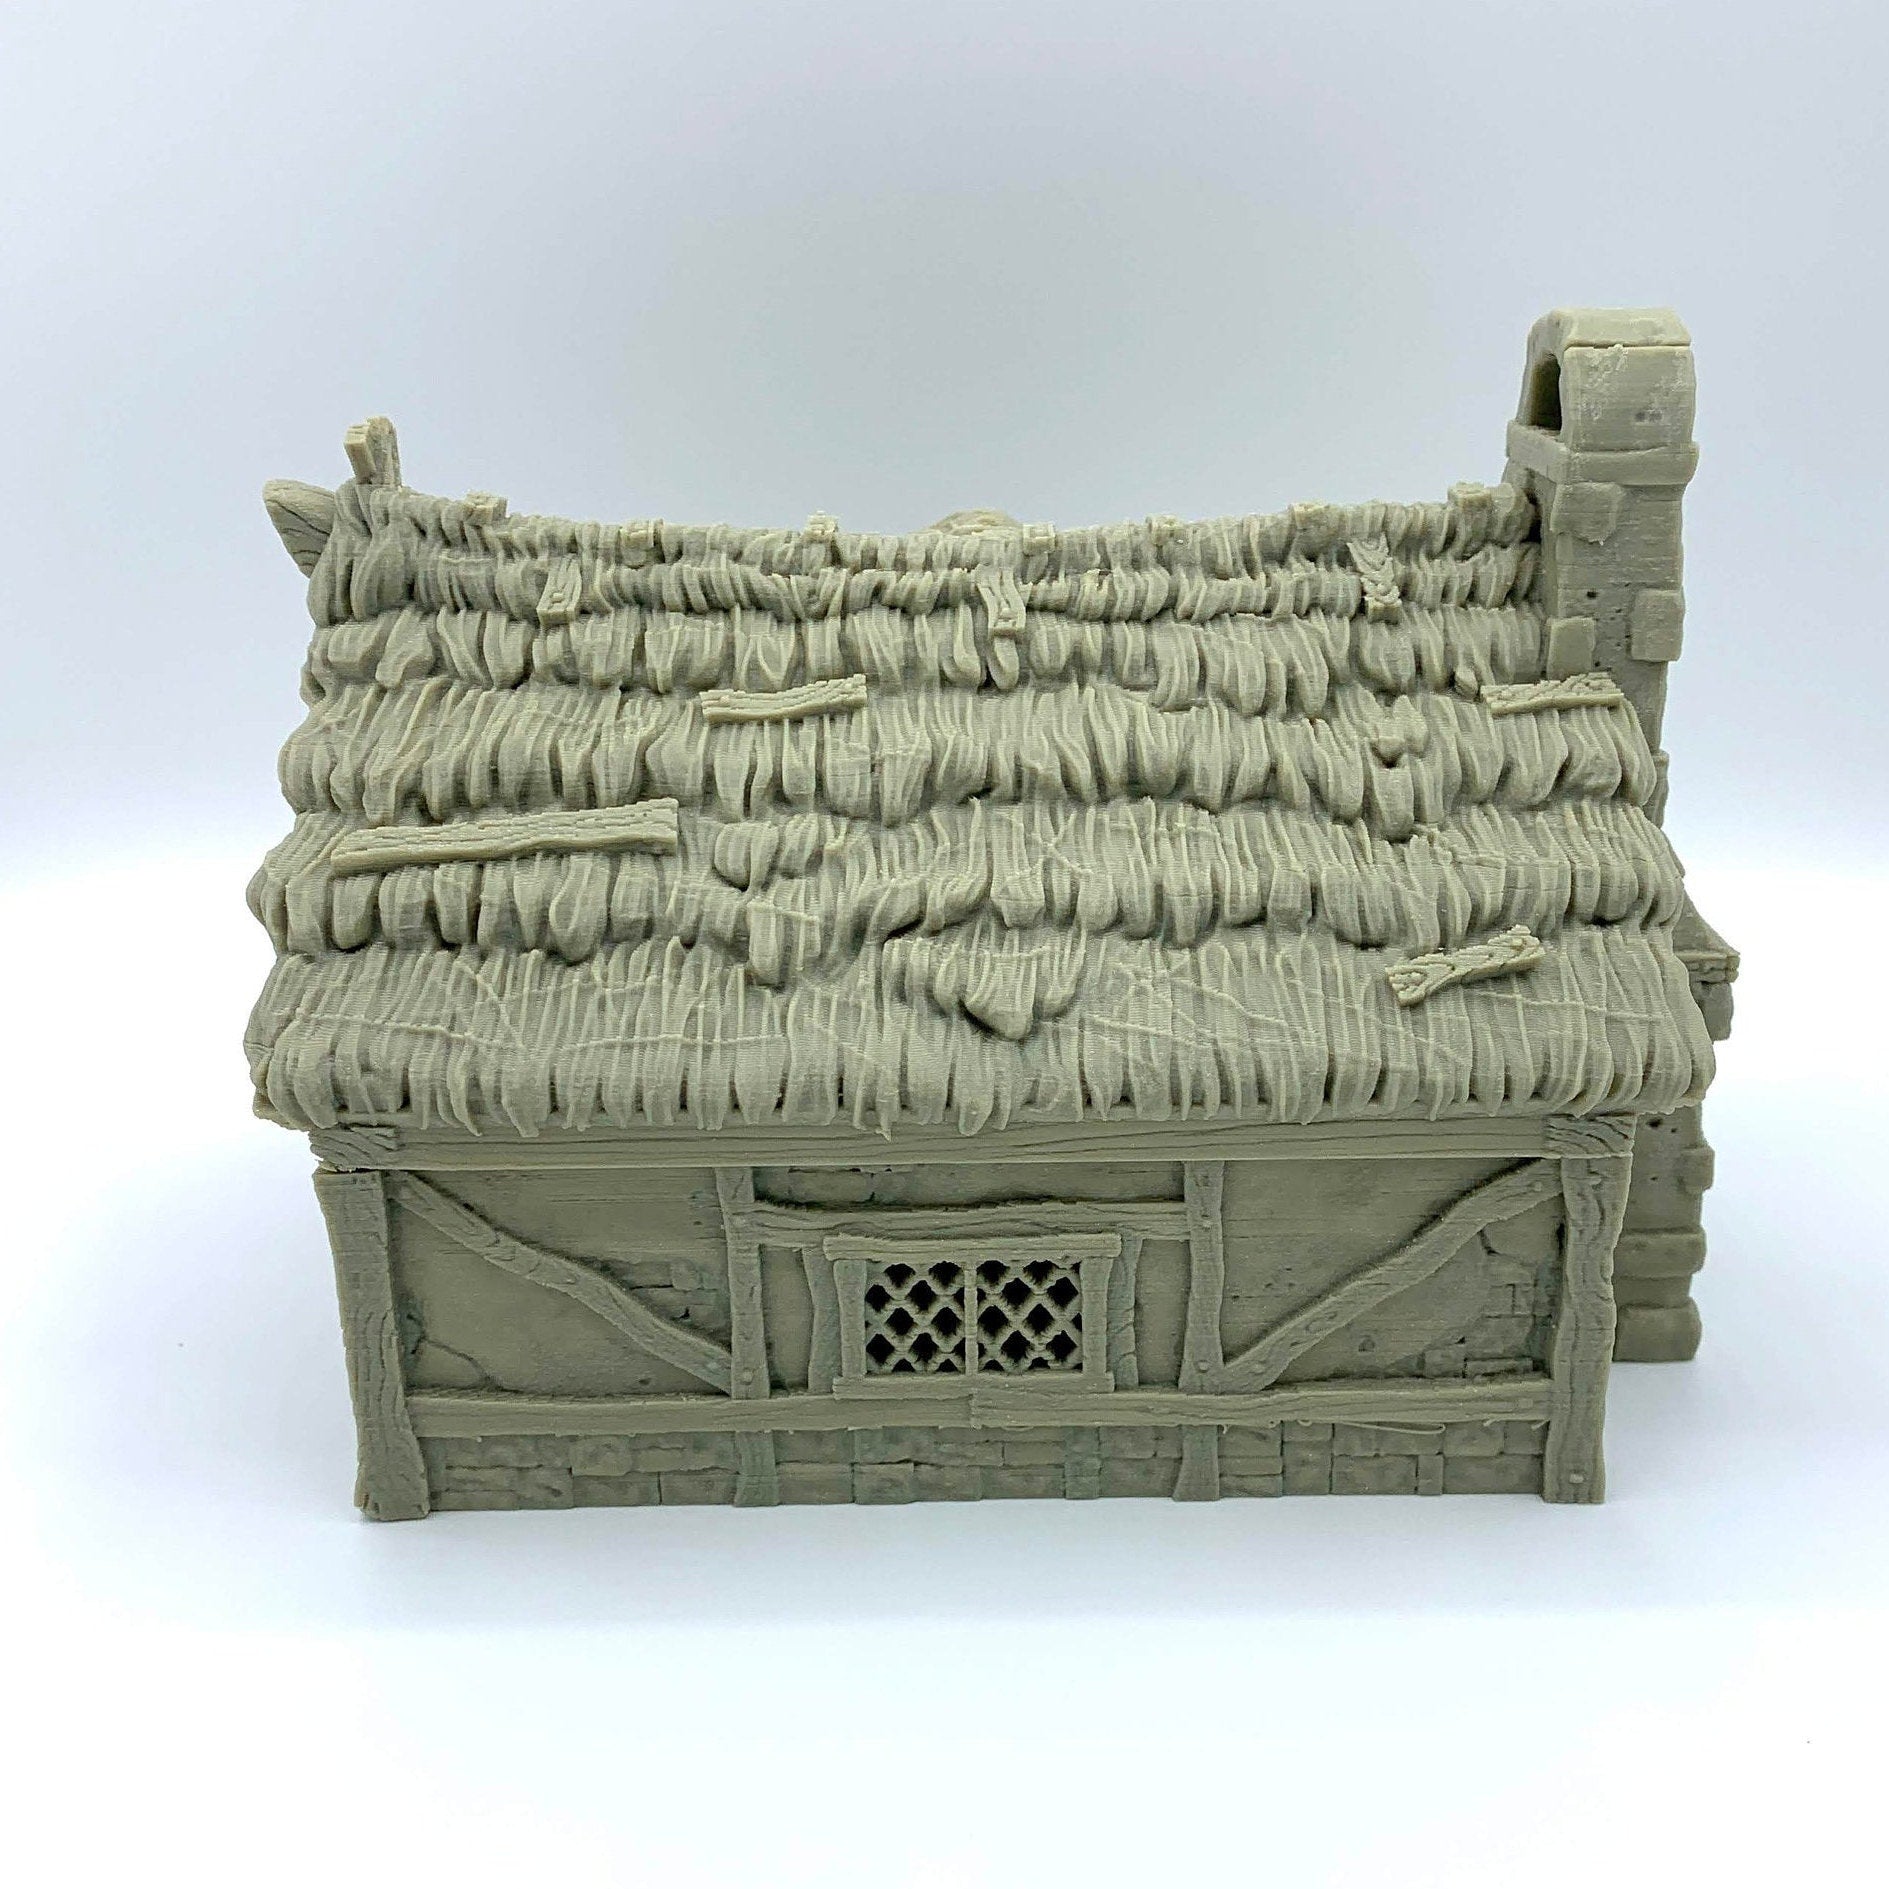 City Of Tarok - Medieval Cottage 2 Thatched Roof Version / 28mm Wargame / RPG 3d Printed Tabletop Terrain